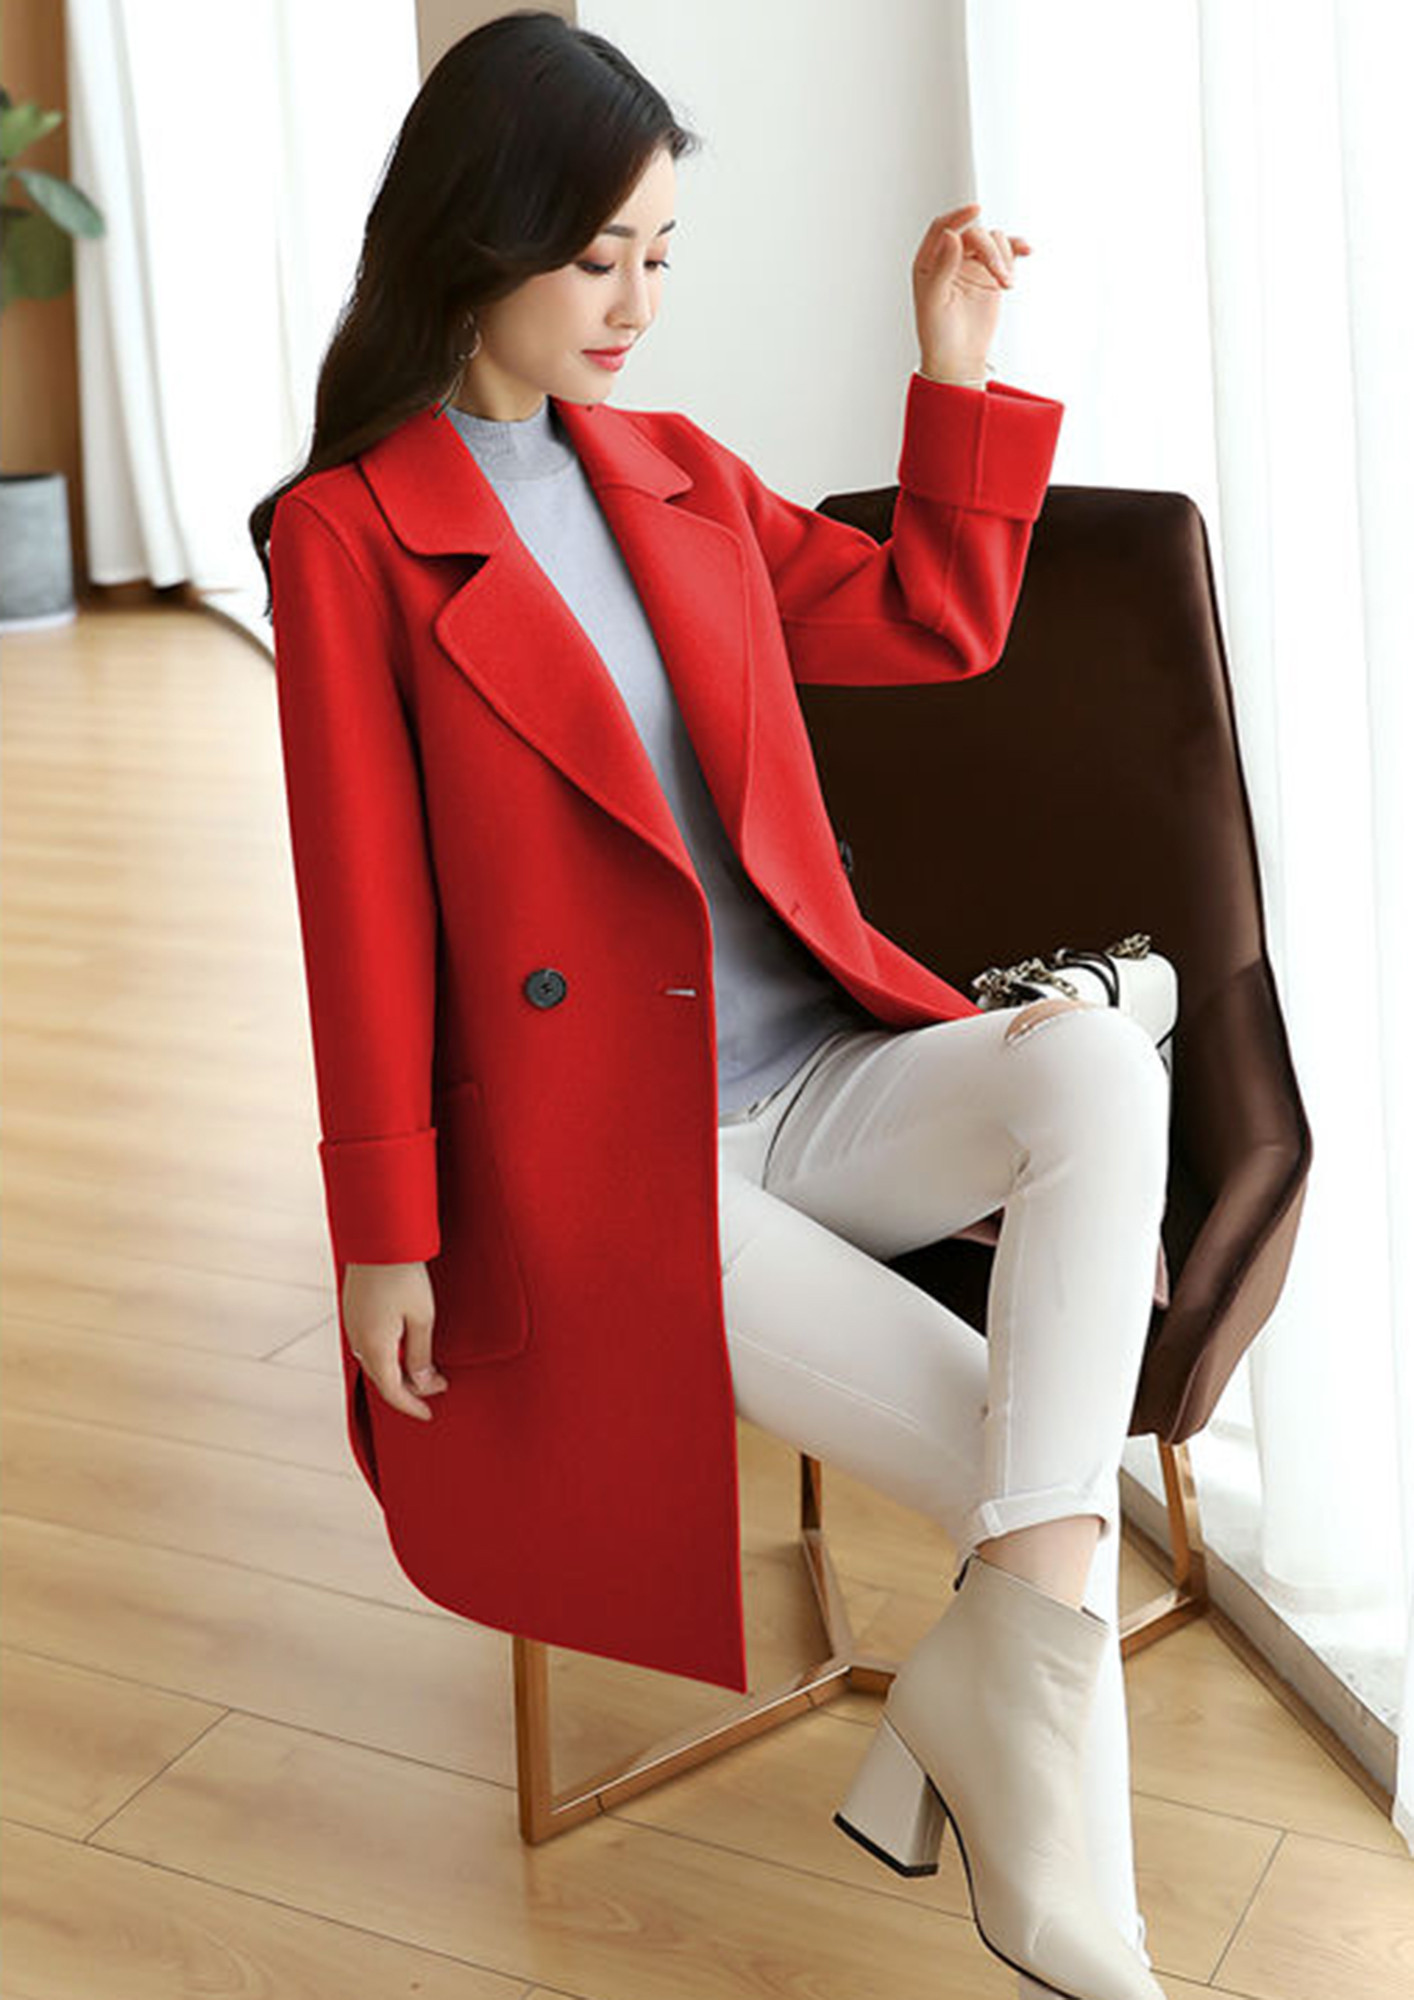 LONG AND STUNNING RED COAT